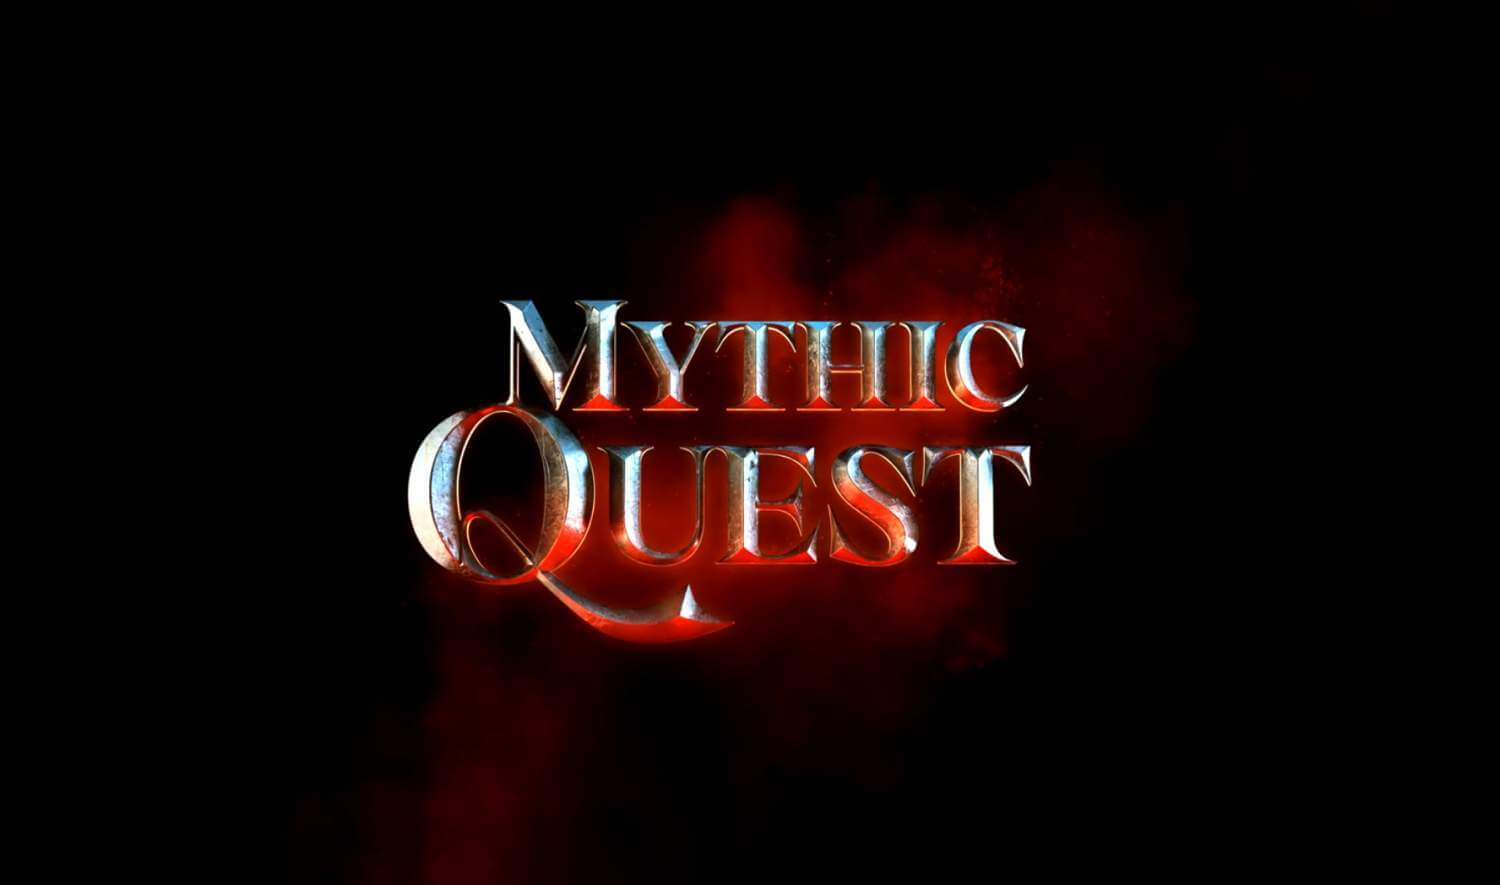 mythic quest cast